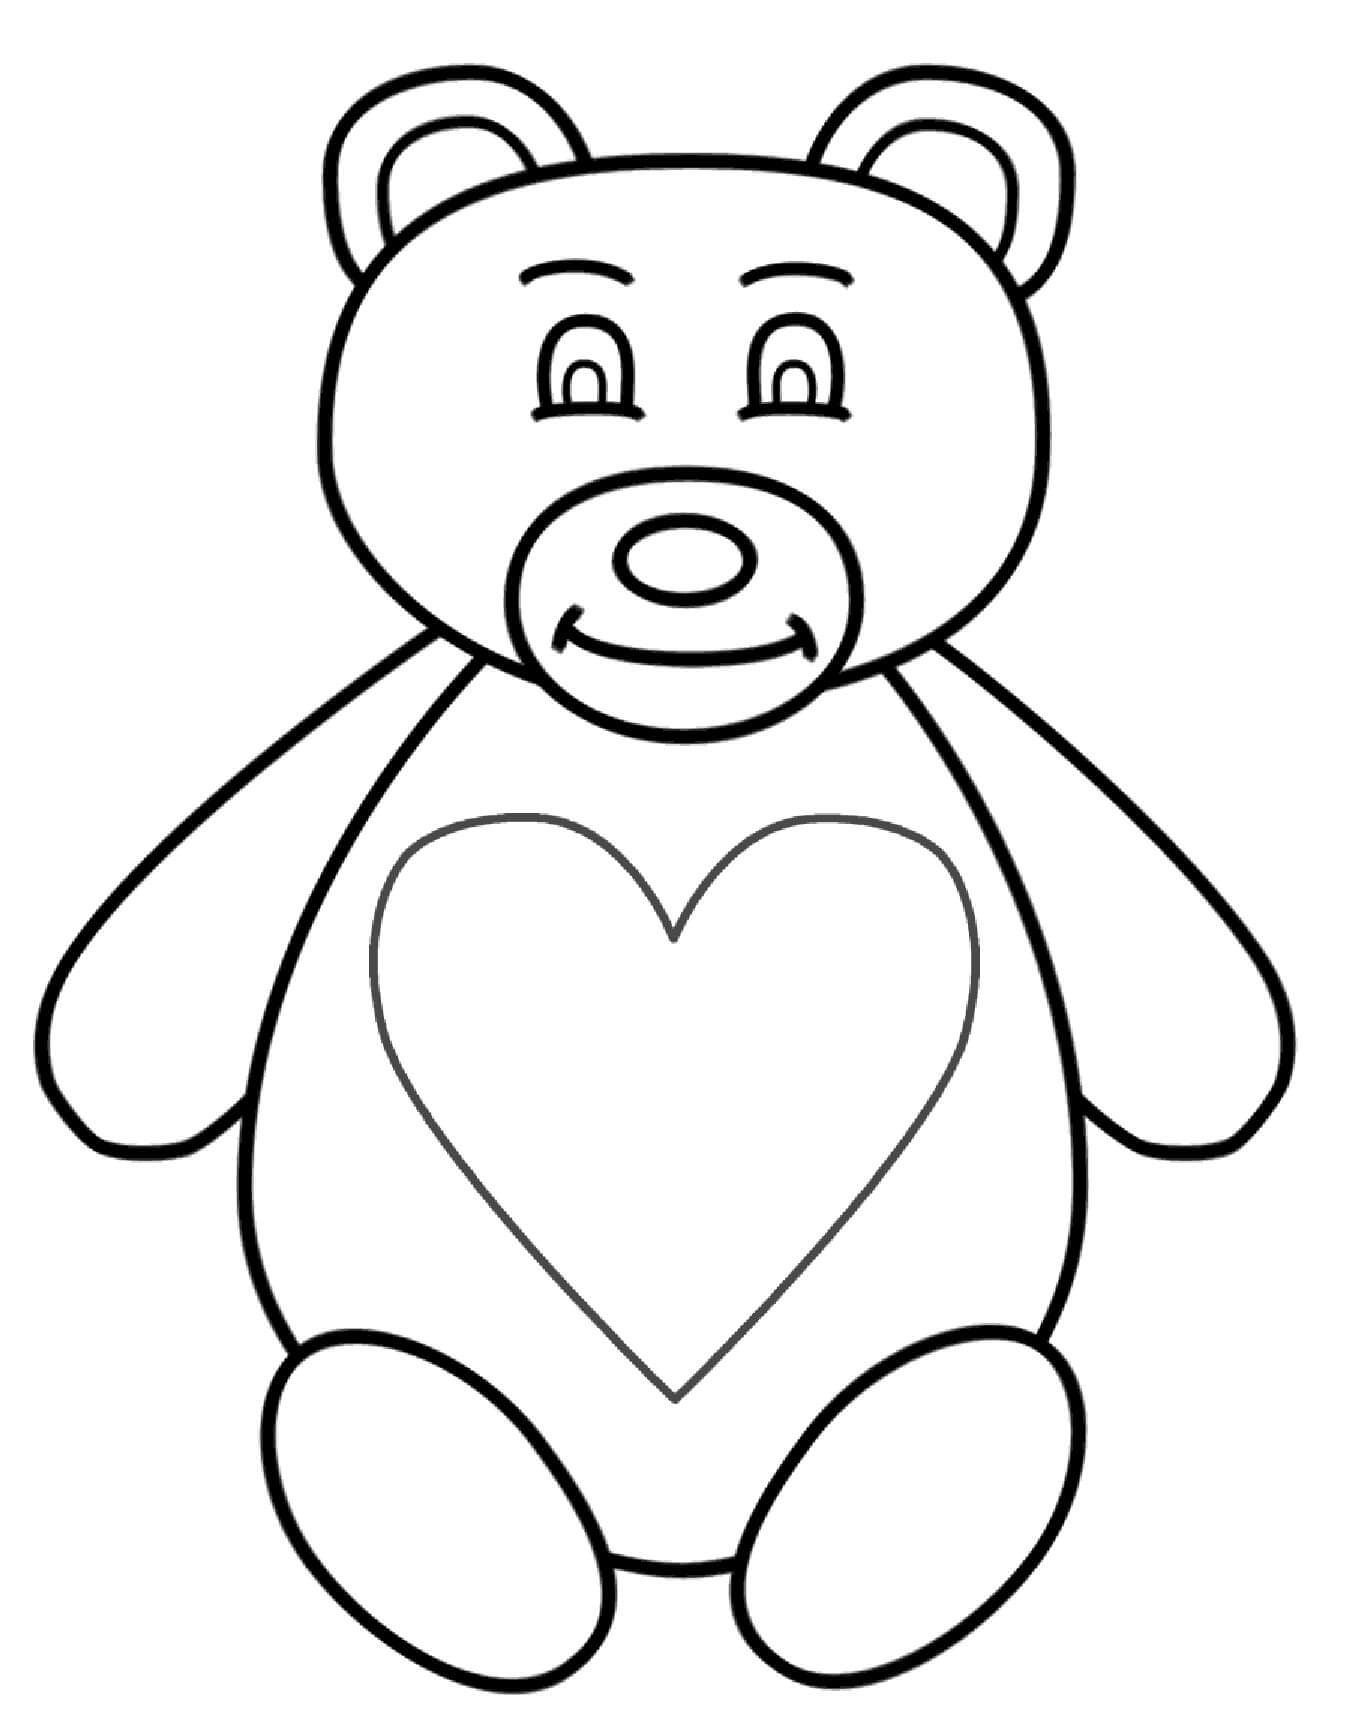 Heart teddy bear coloring page